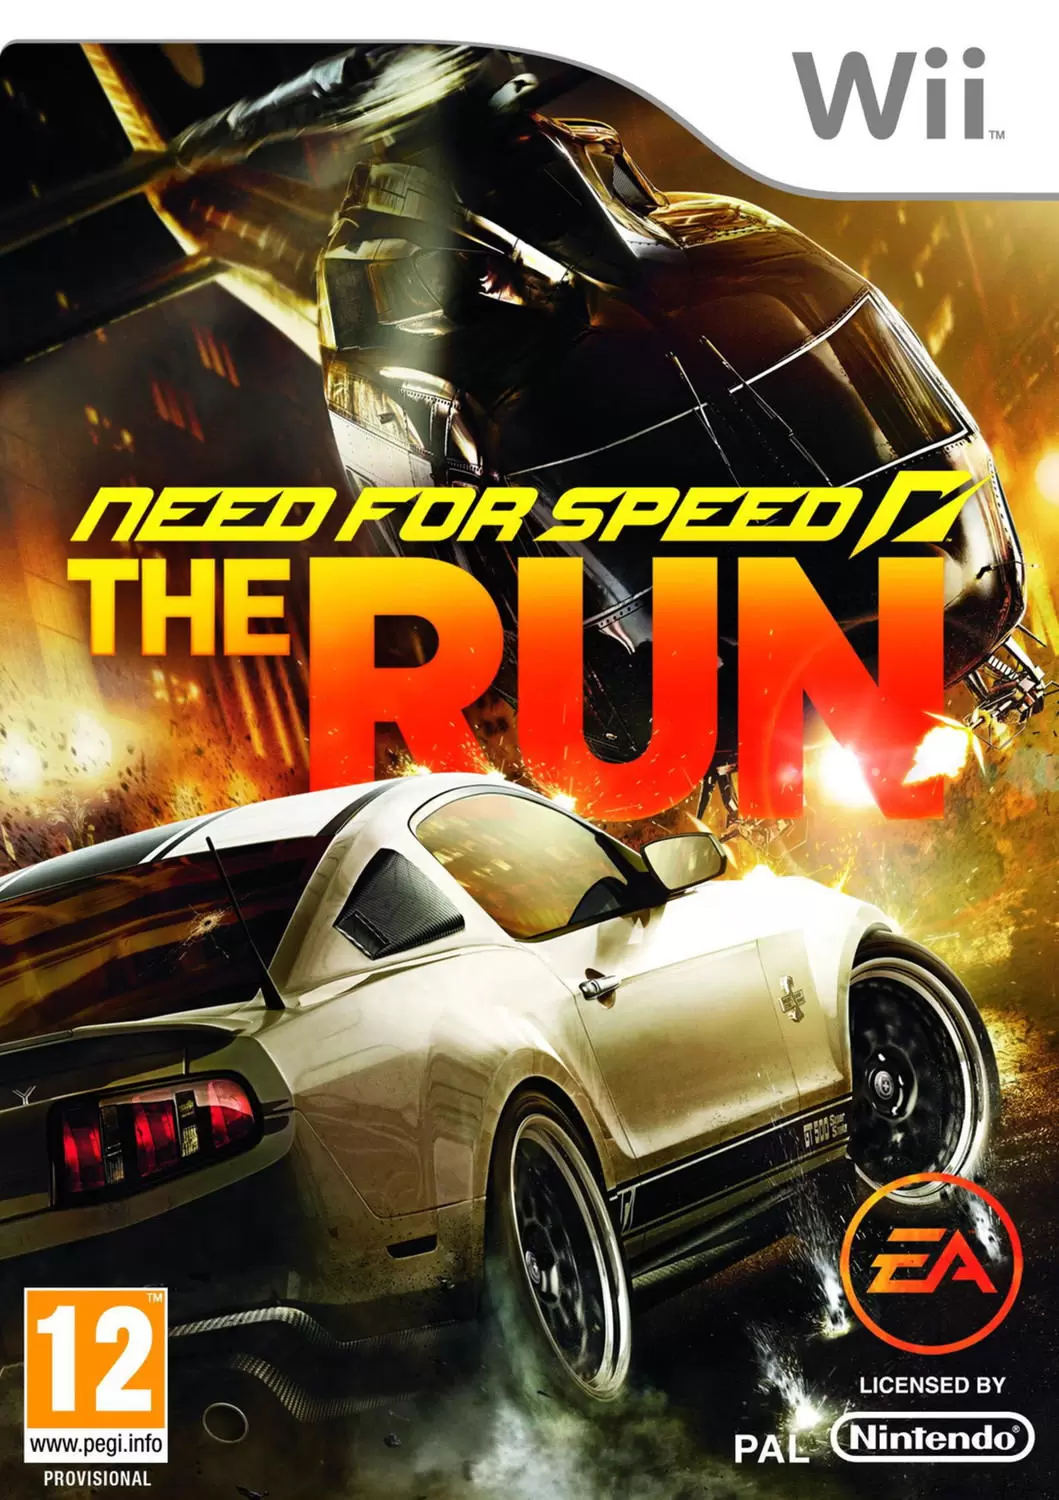 Jeux Nintendo Wii - Need for Speed: The Run